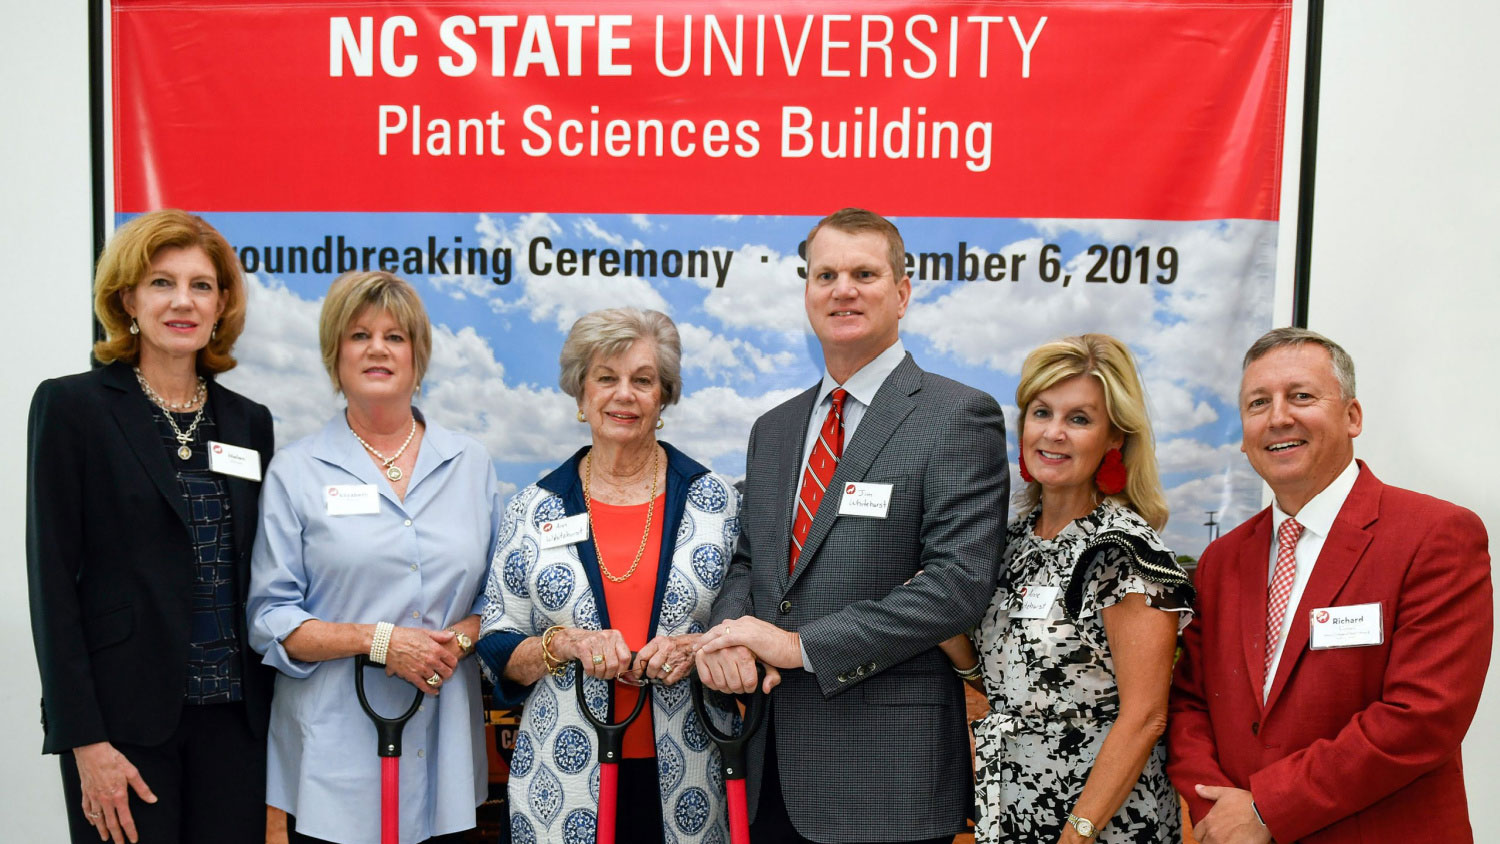 The Whitehurst family at the groundbreaking ceremony for the NC Plant Sciences Building